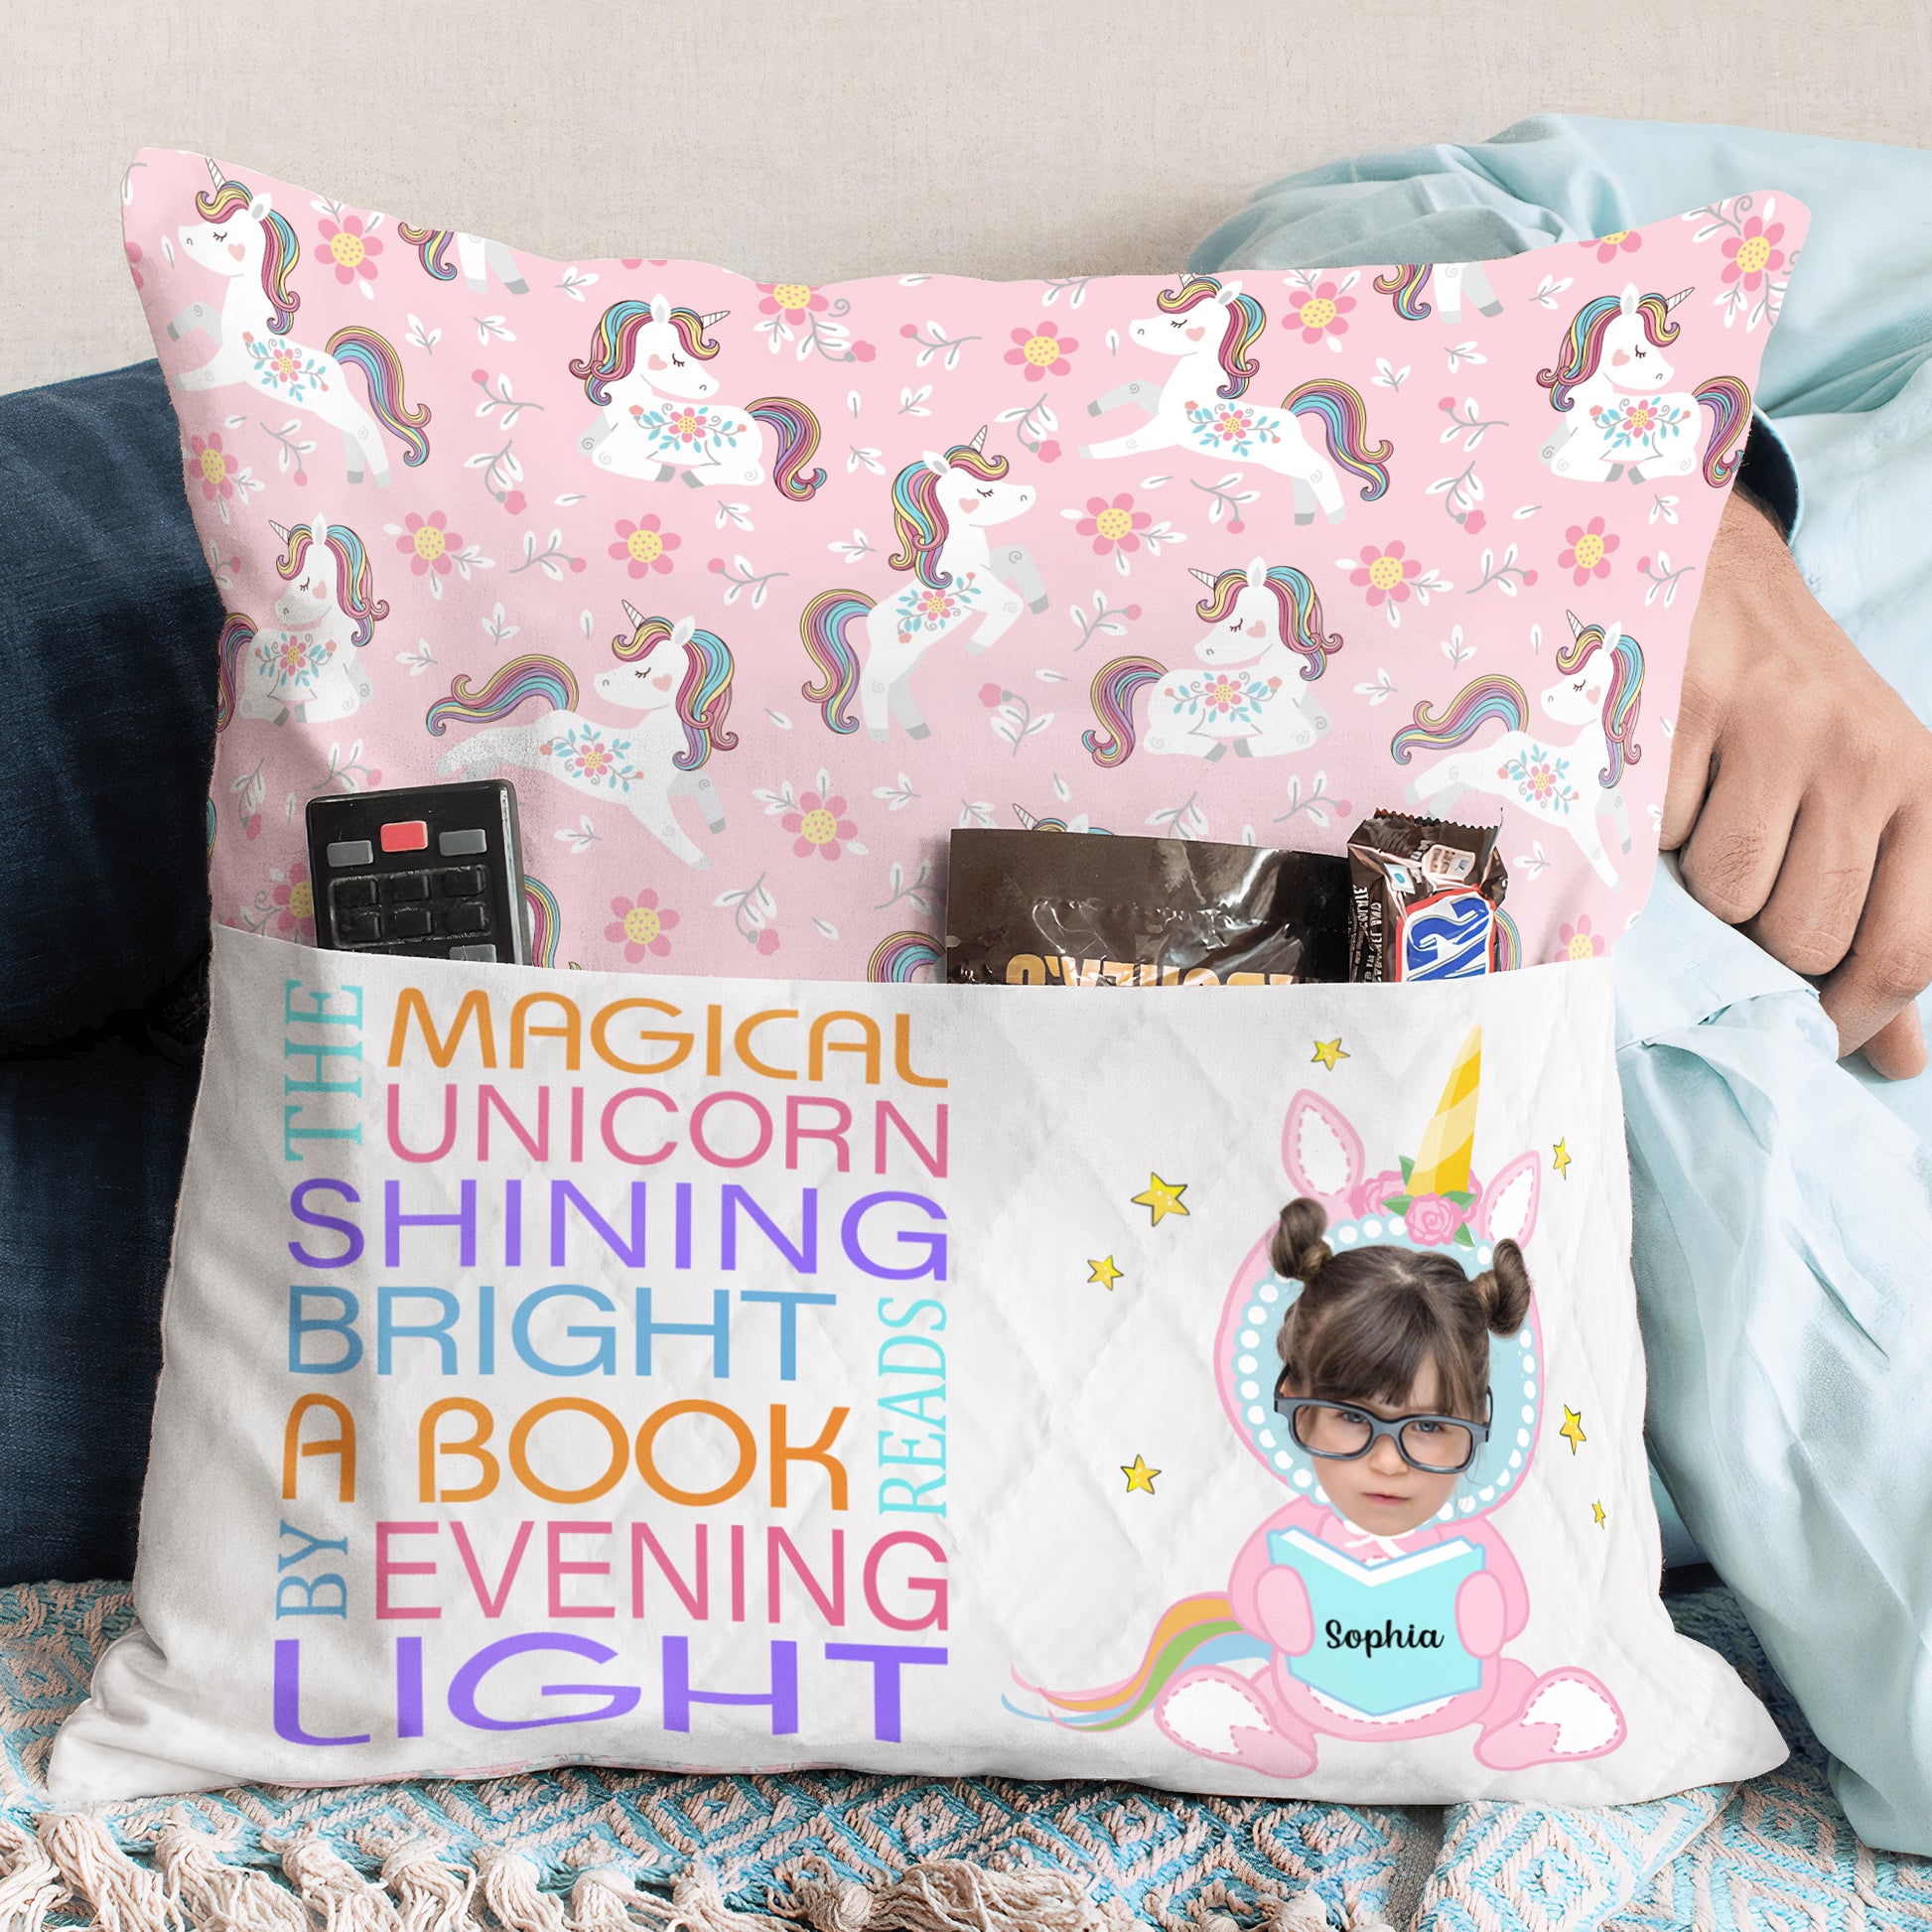 Rainbow Hair Unicorn - Personalized Photo Pocket Pillow (Insert Included)